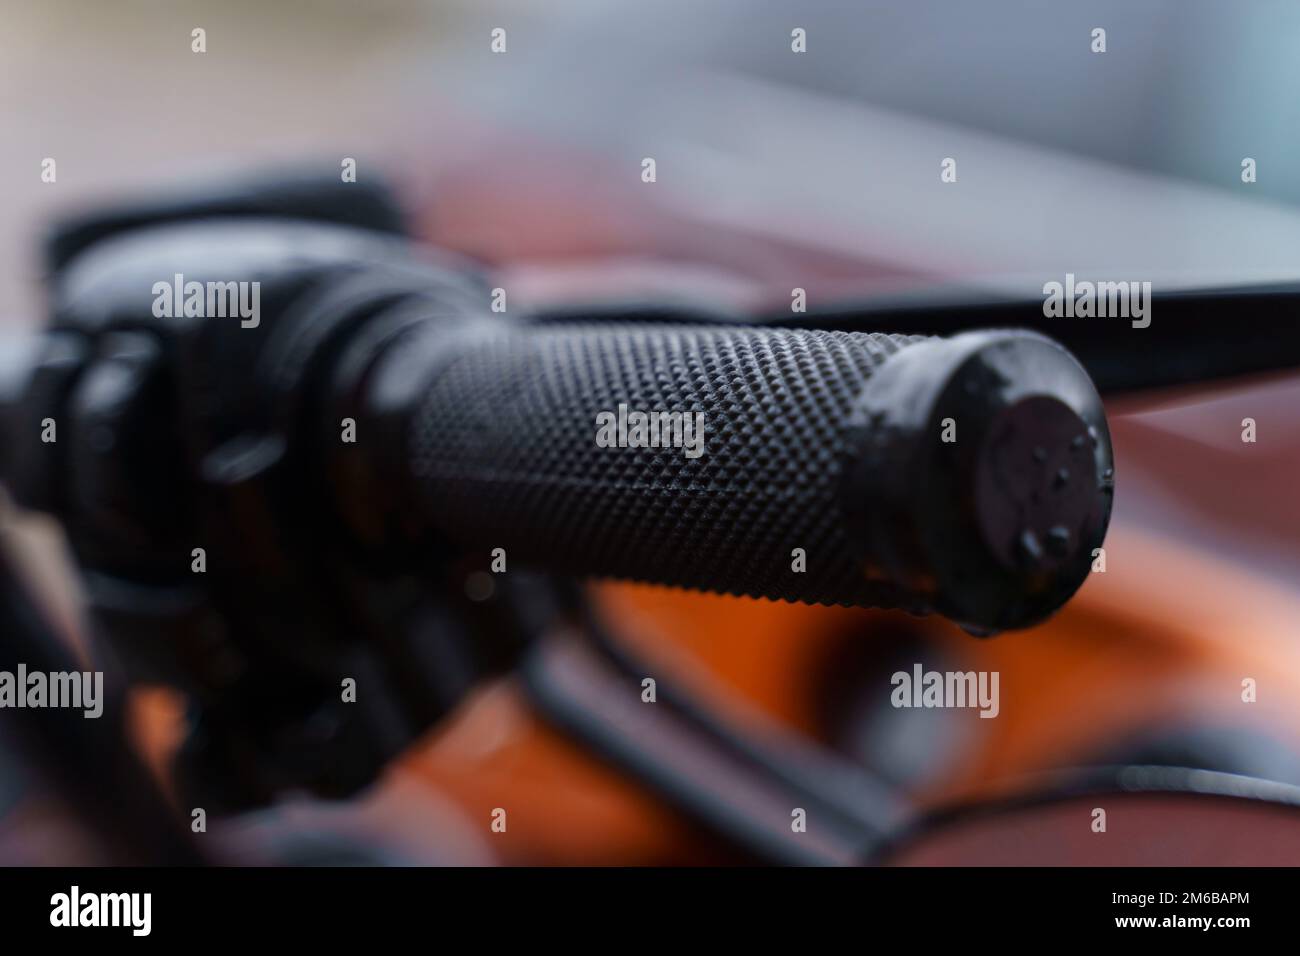 Black throttle on a motorcycle handlebar. Close-up. Transport concept. Stock Photo